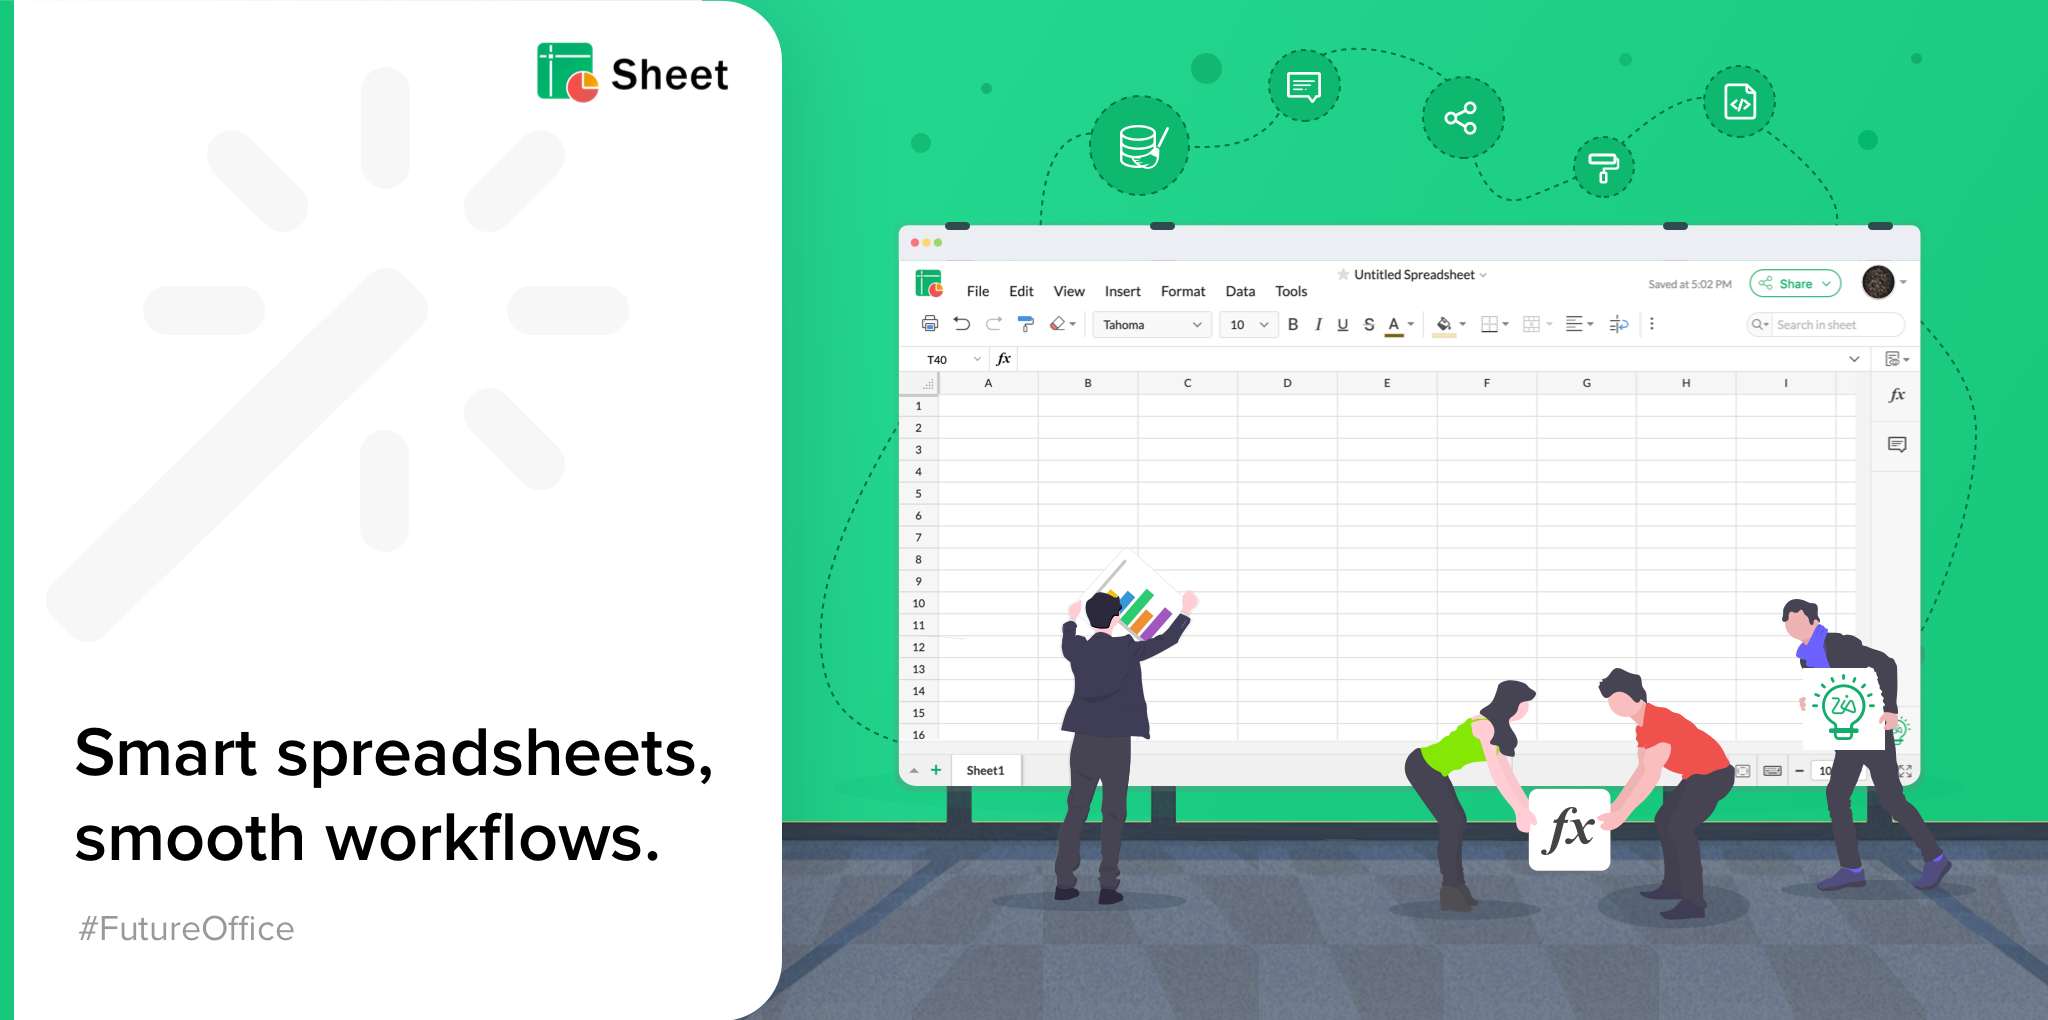 Introducing Sheet 5—Bringing you smarter analytics and new integrations